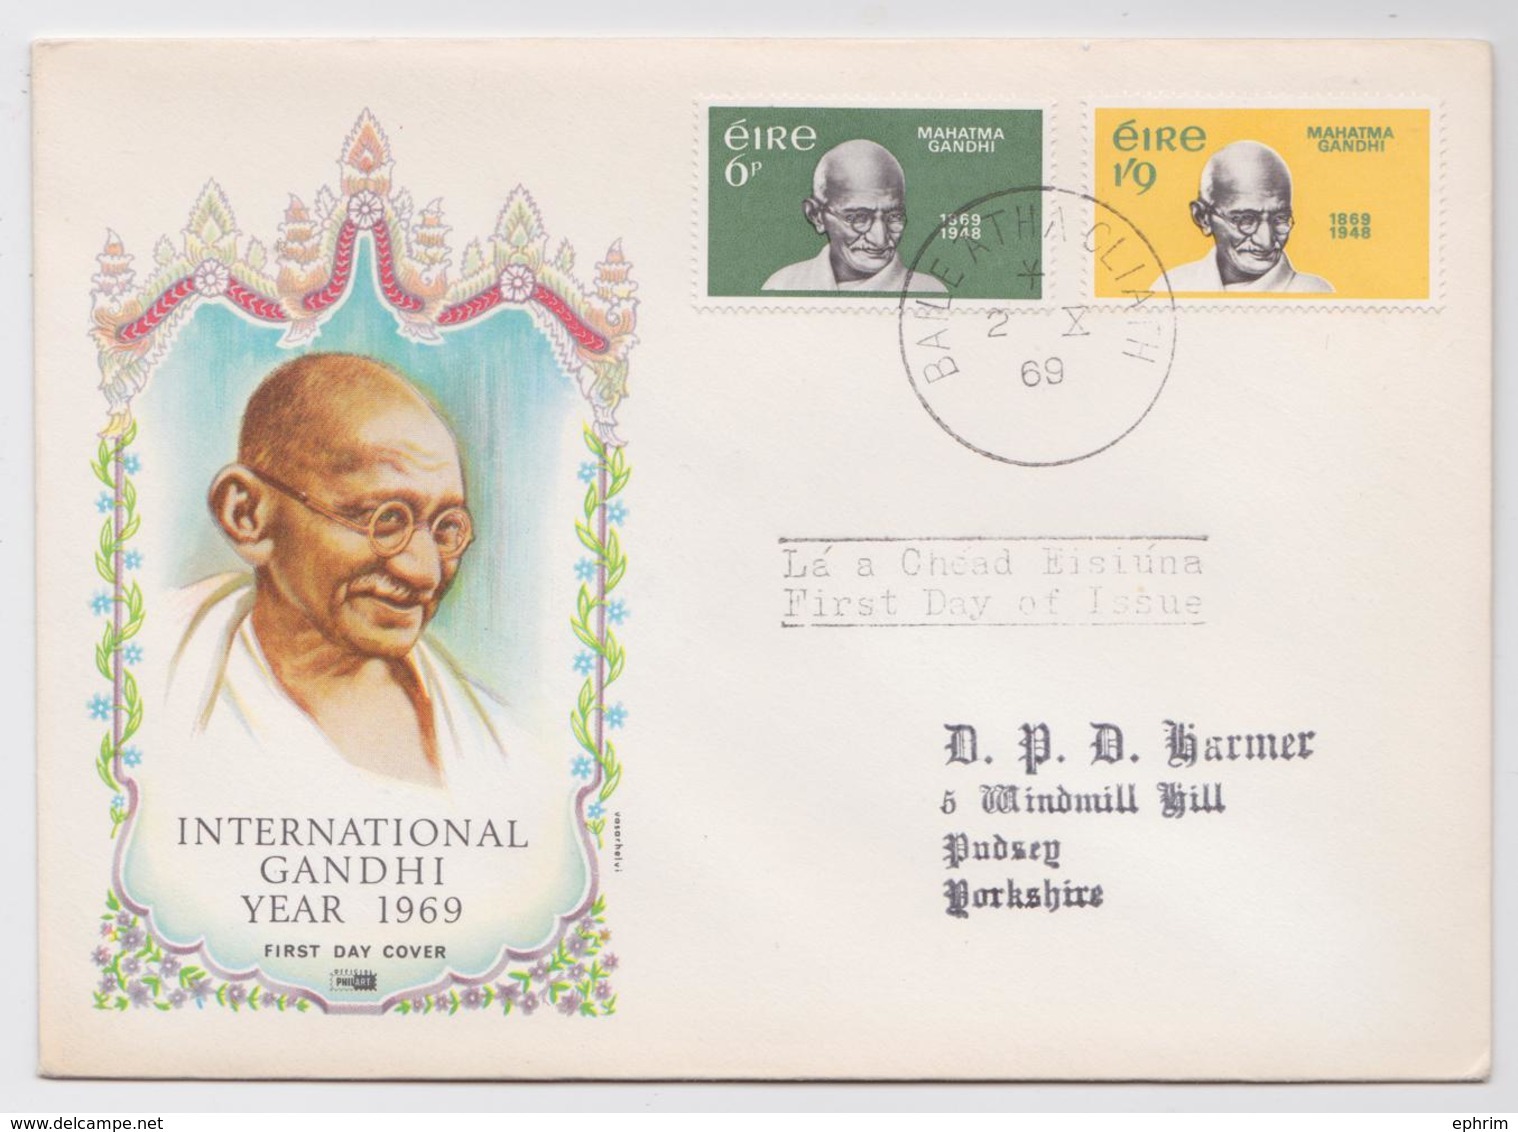 MAHATMA GANDHI CENTENARY - FDC EIRE 1969 - FIRST DAY OF ISSUE - ENVELOPPE PREMIER JOUR CENTENAIRE - COVER STAMP TIMBRE - Mahatma Gandhi